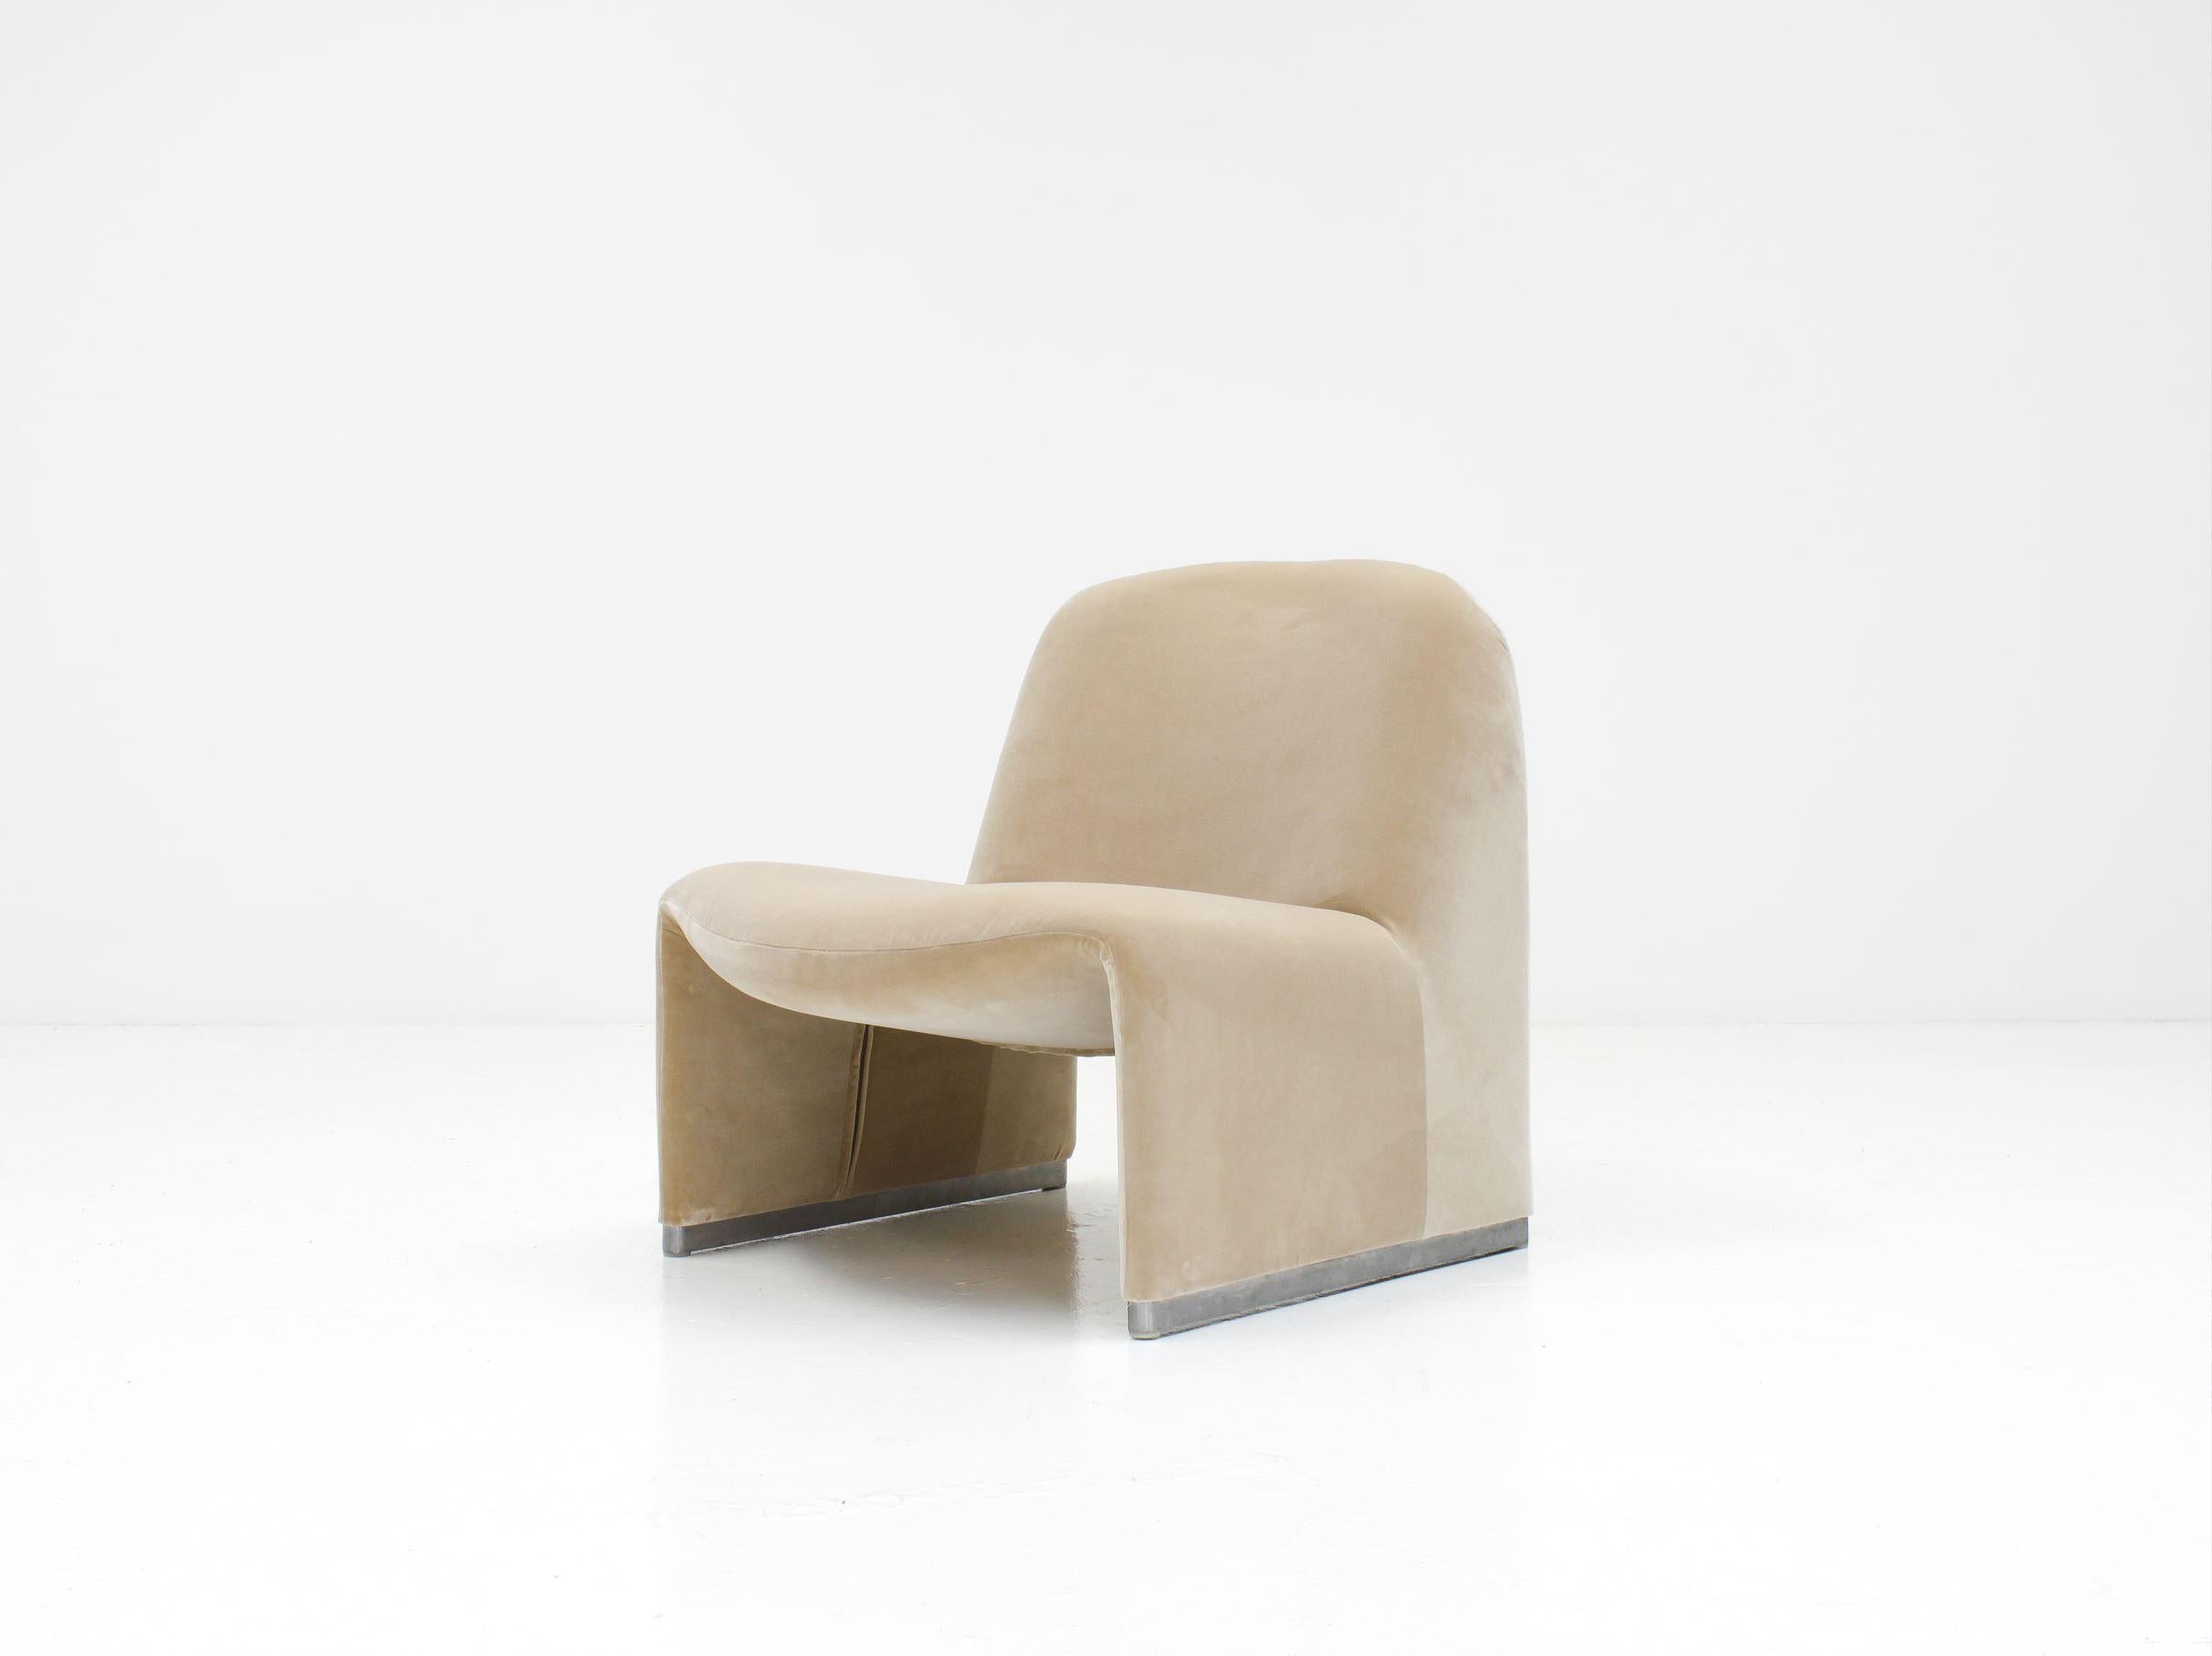 A single Giancarlo Piretti “Alky” chair newly upholstered in Designers Guild linen colored cotton velvet. 

Manufactured by Artifort in the 1970s.

The organic shape offers a minimal appearance but also comfort.

*Potentially customizable in